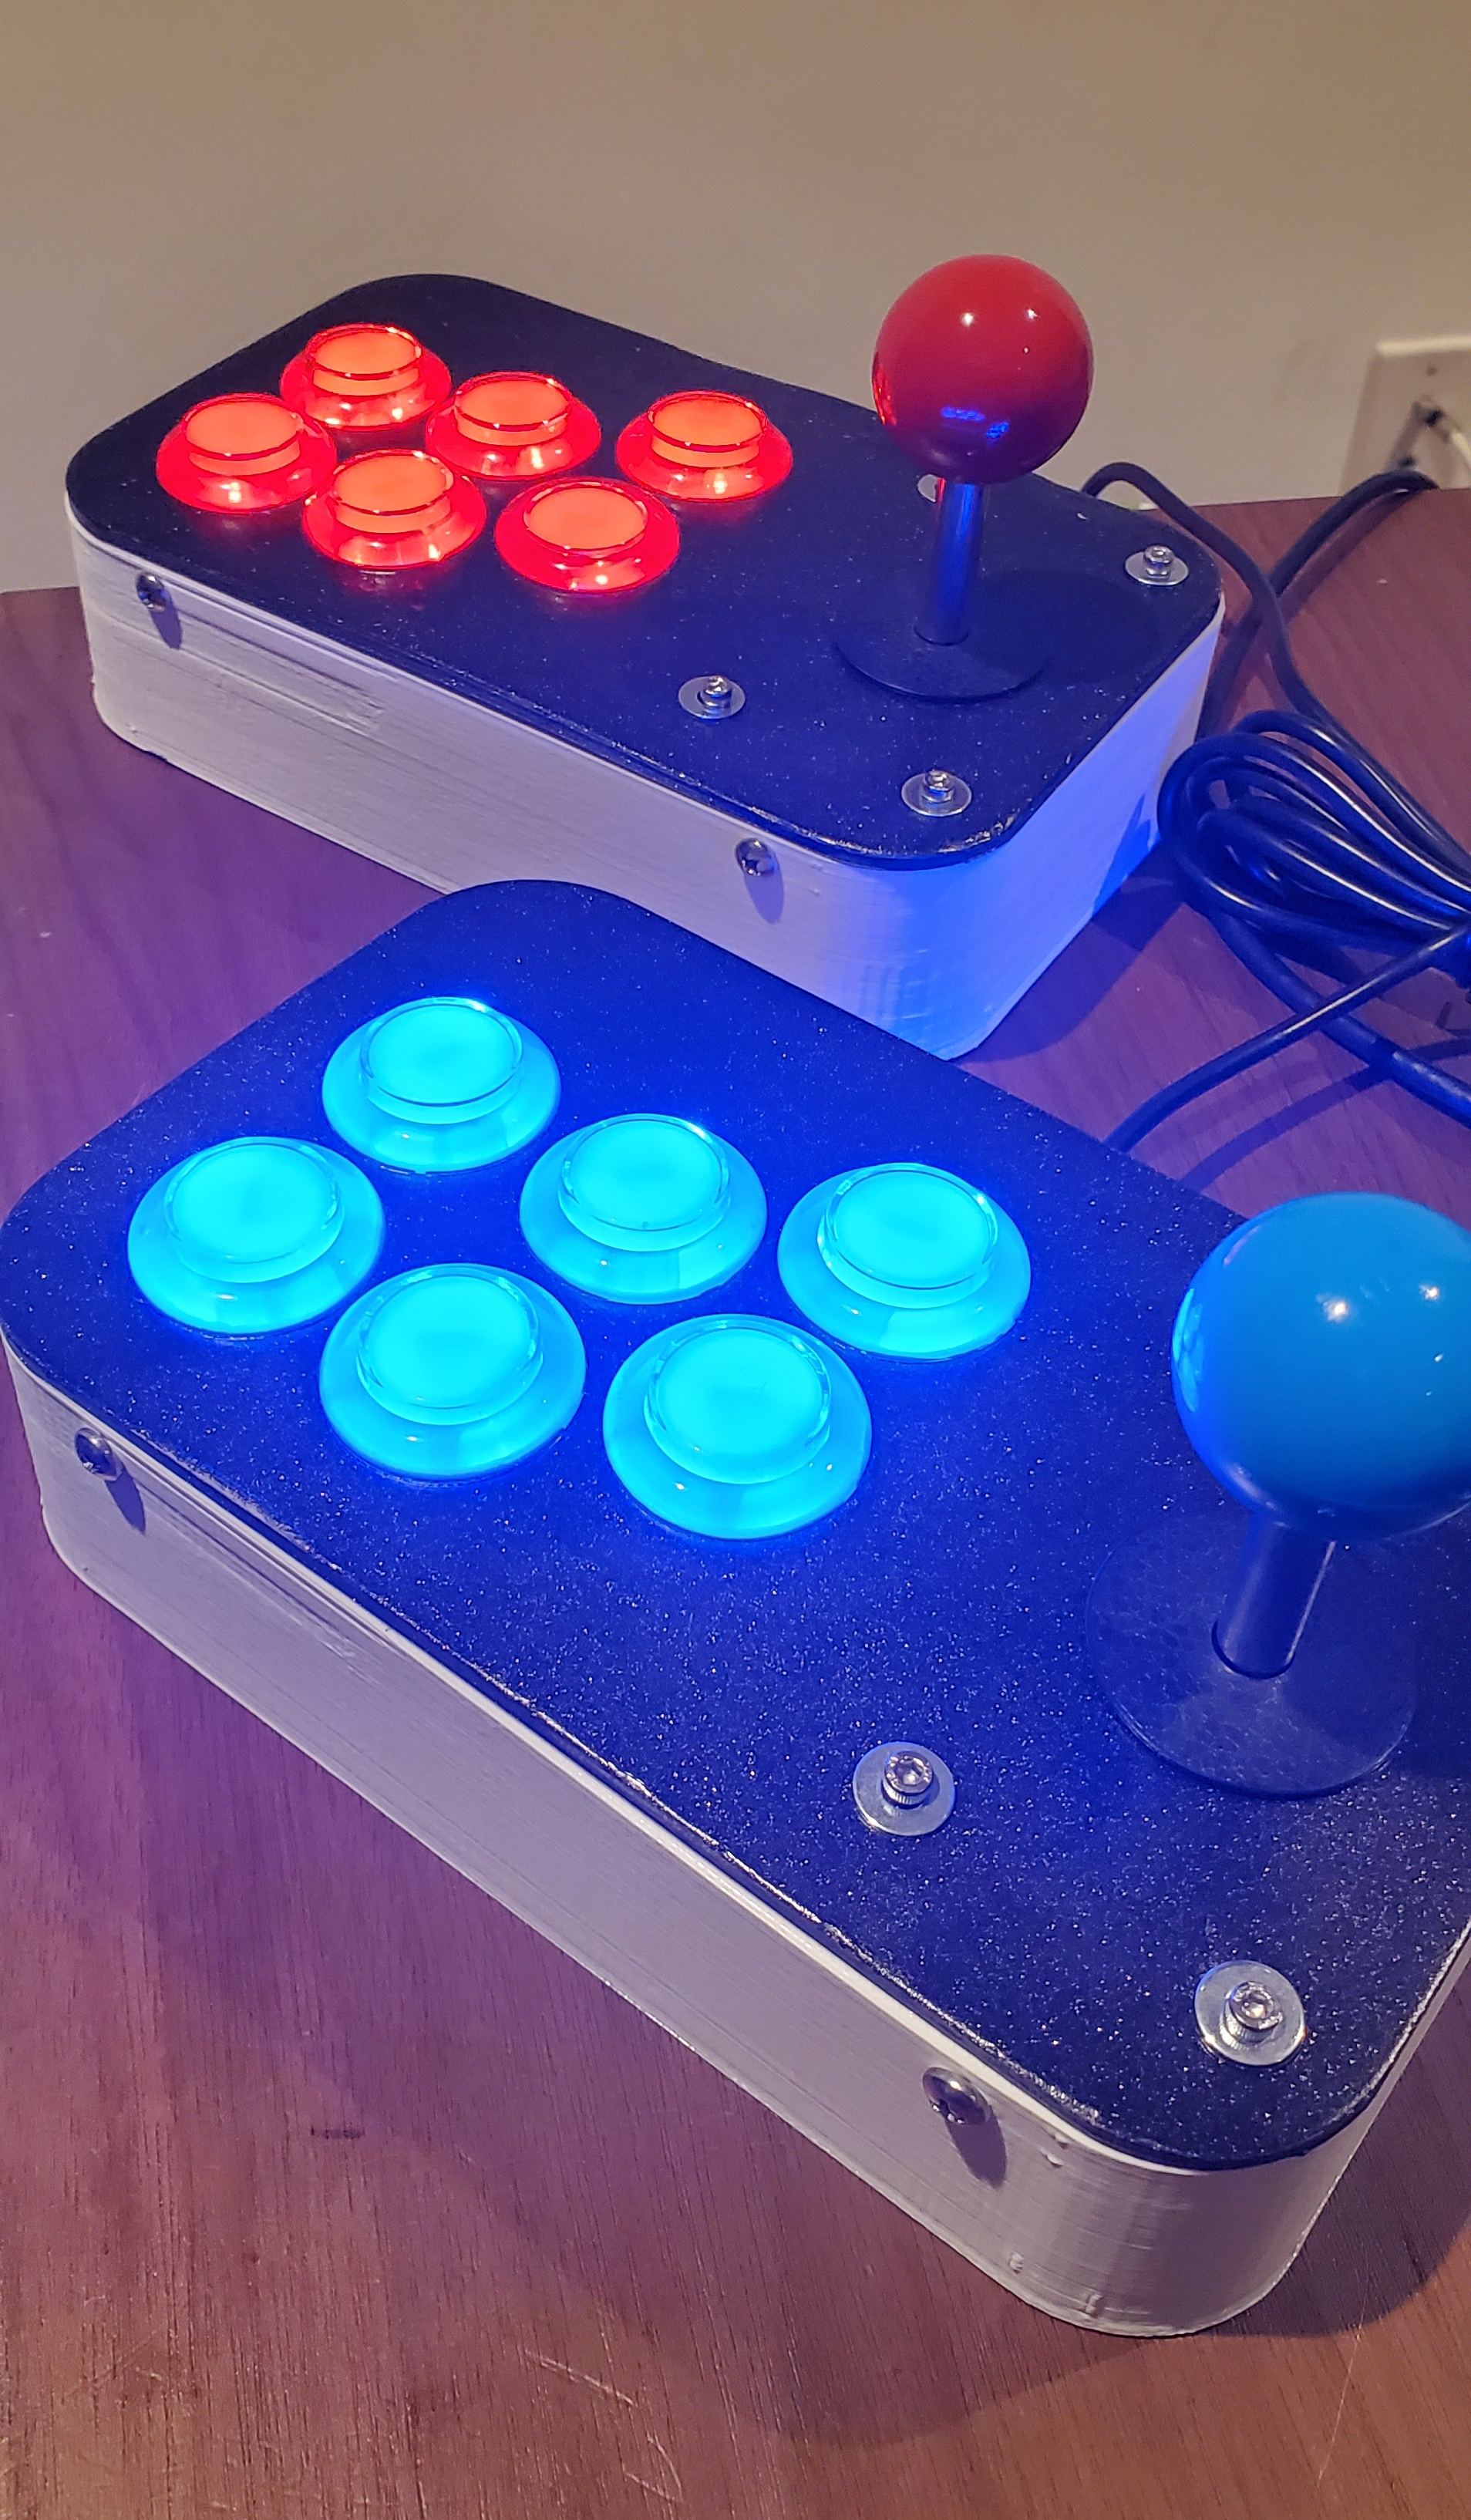 Arcade Controllers